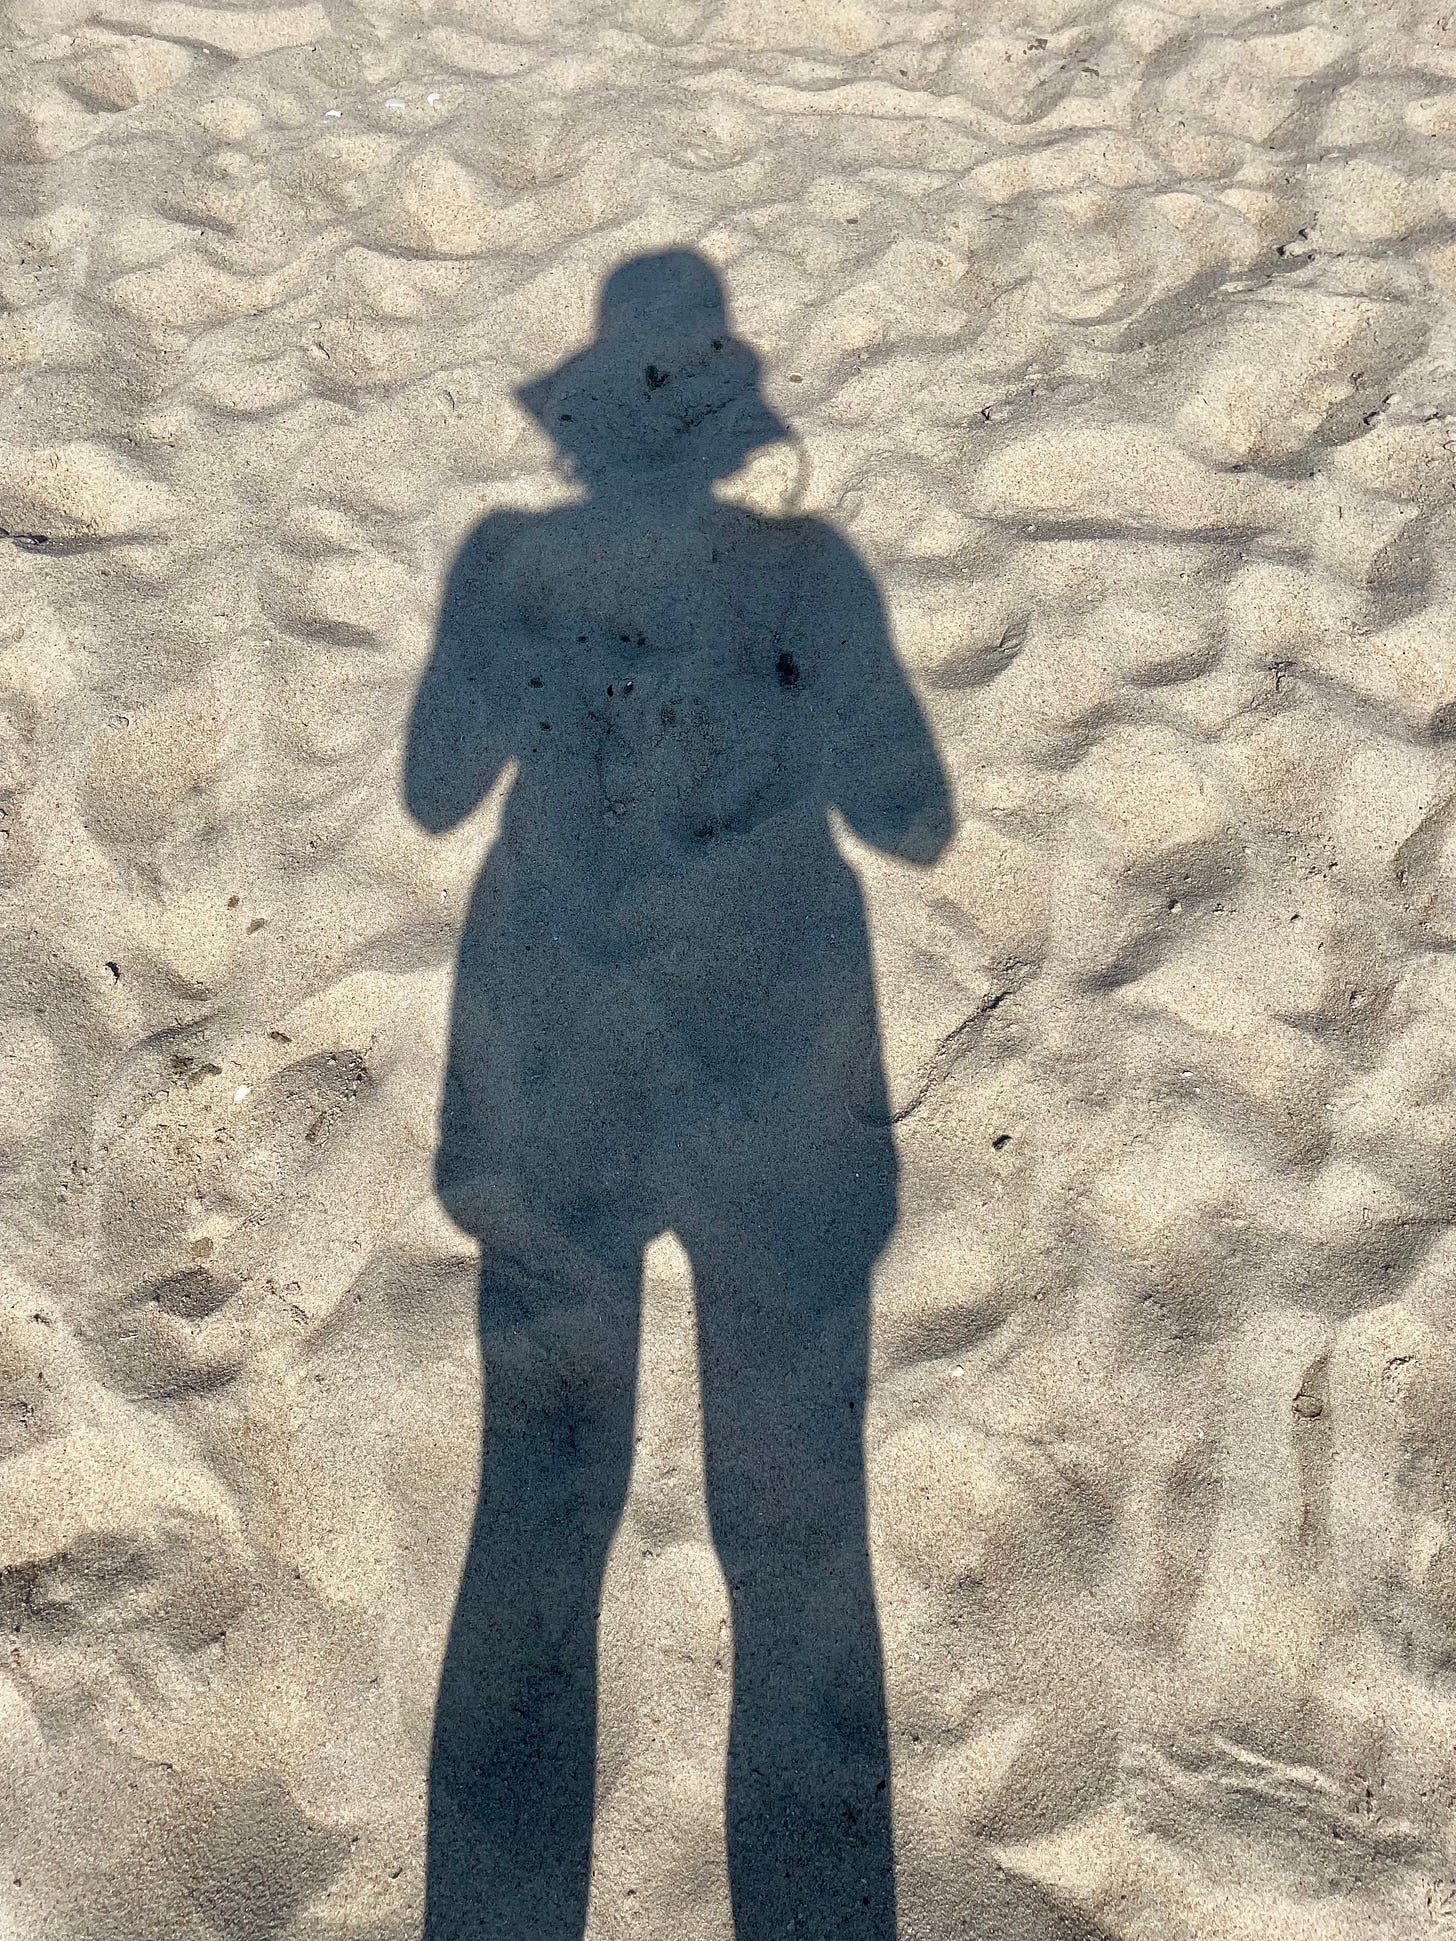 Long shadow of woman in wide-brimmed hat, on beach sand.